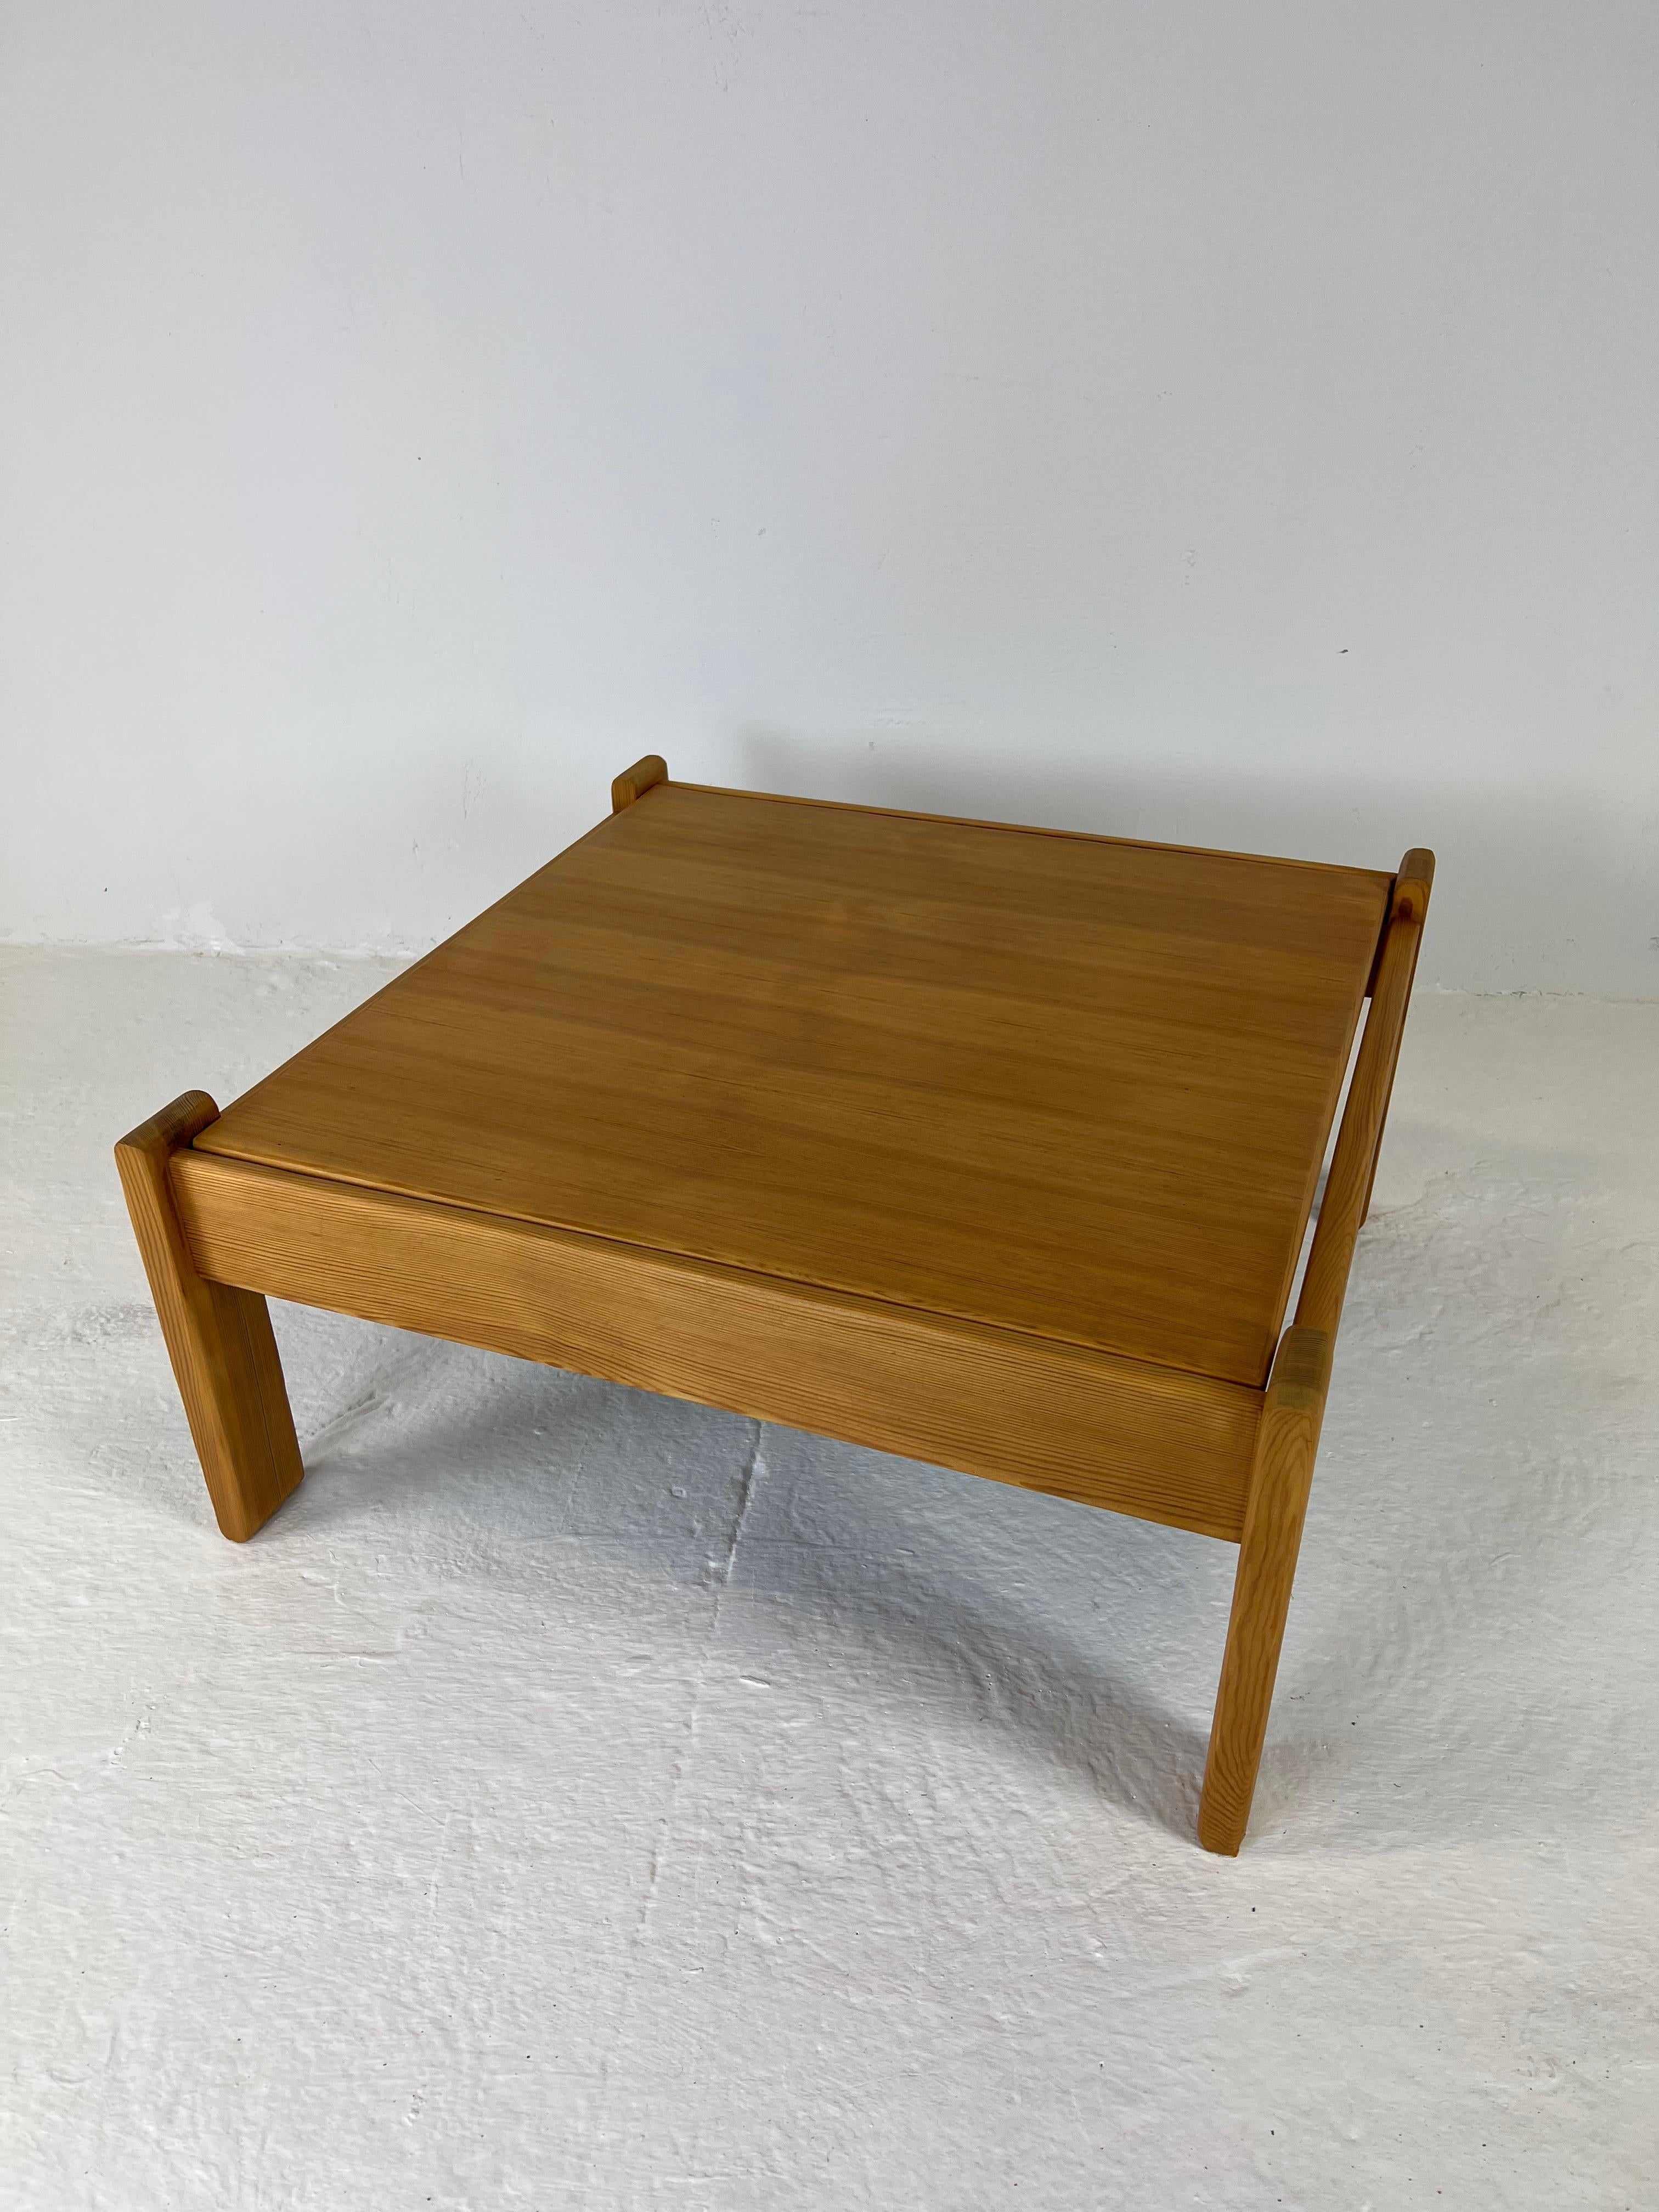 Two-Sided Modernist Coffee Table in Pine Wood, 1970s For Sale 10